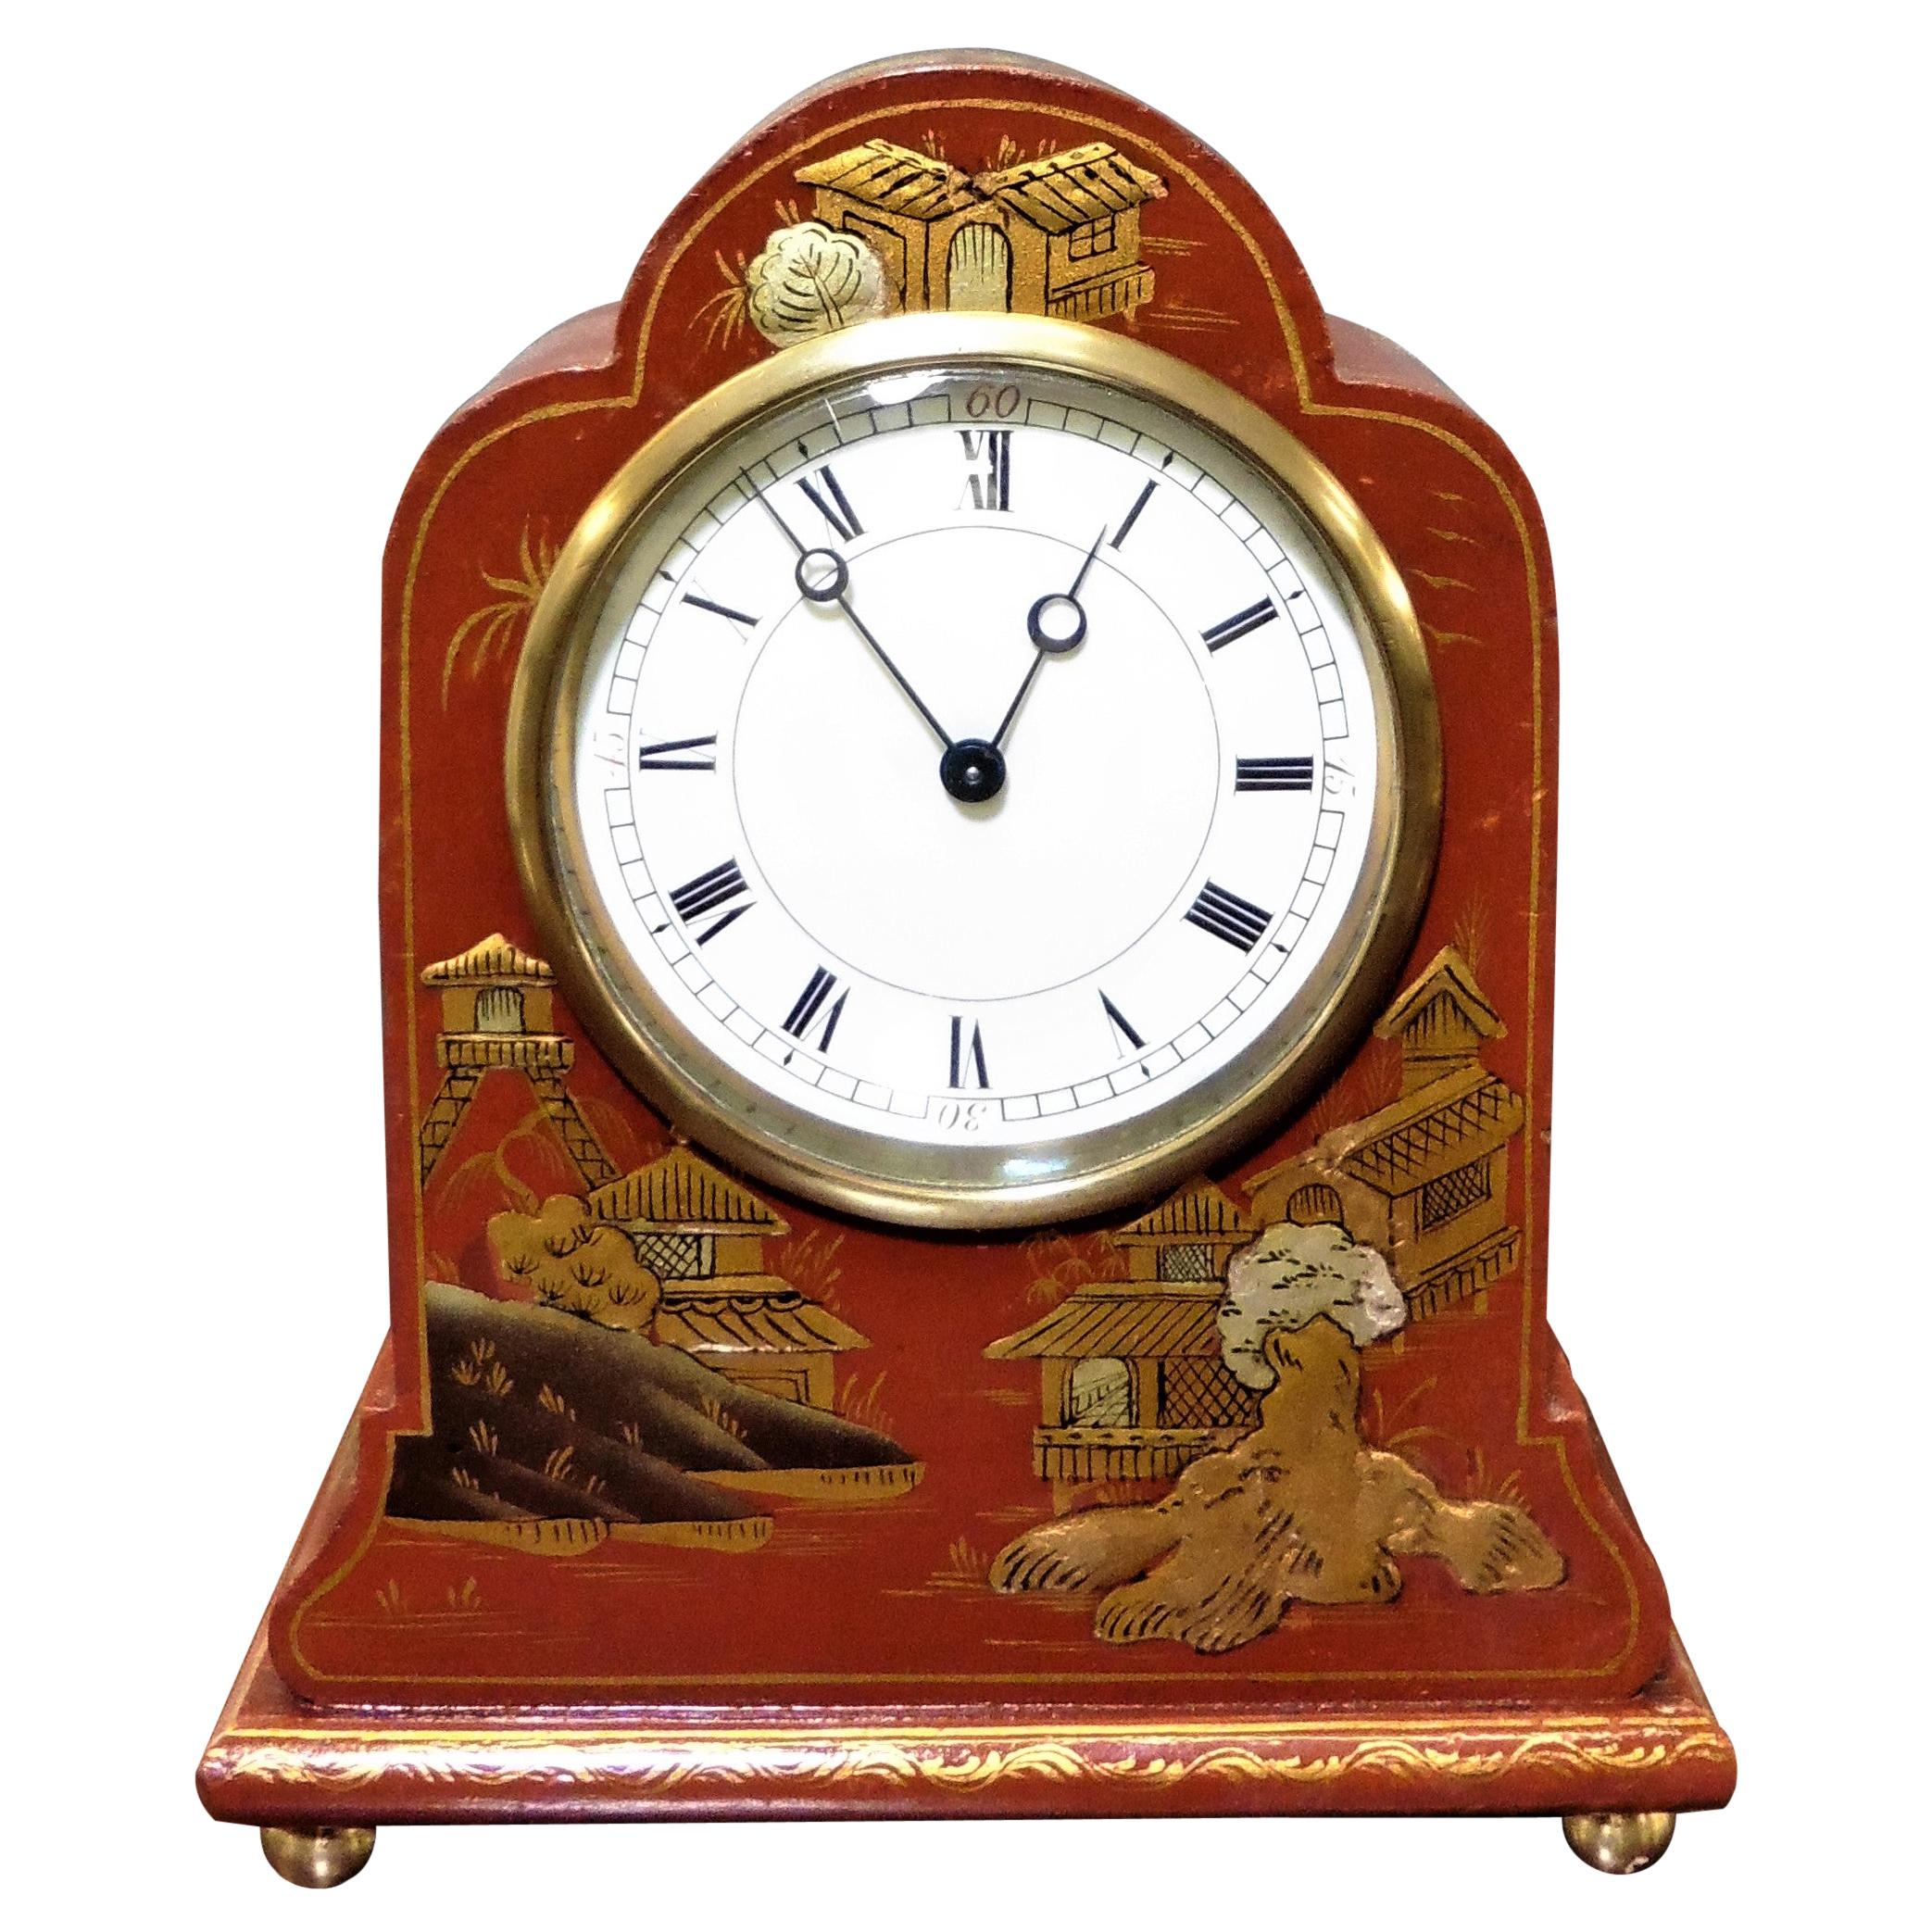 Chinoiserie Decorated Mantel Clock